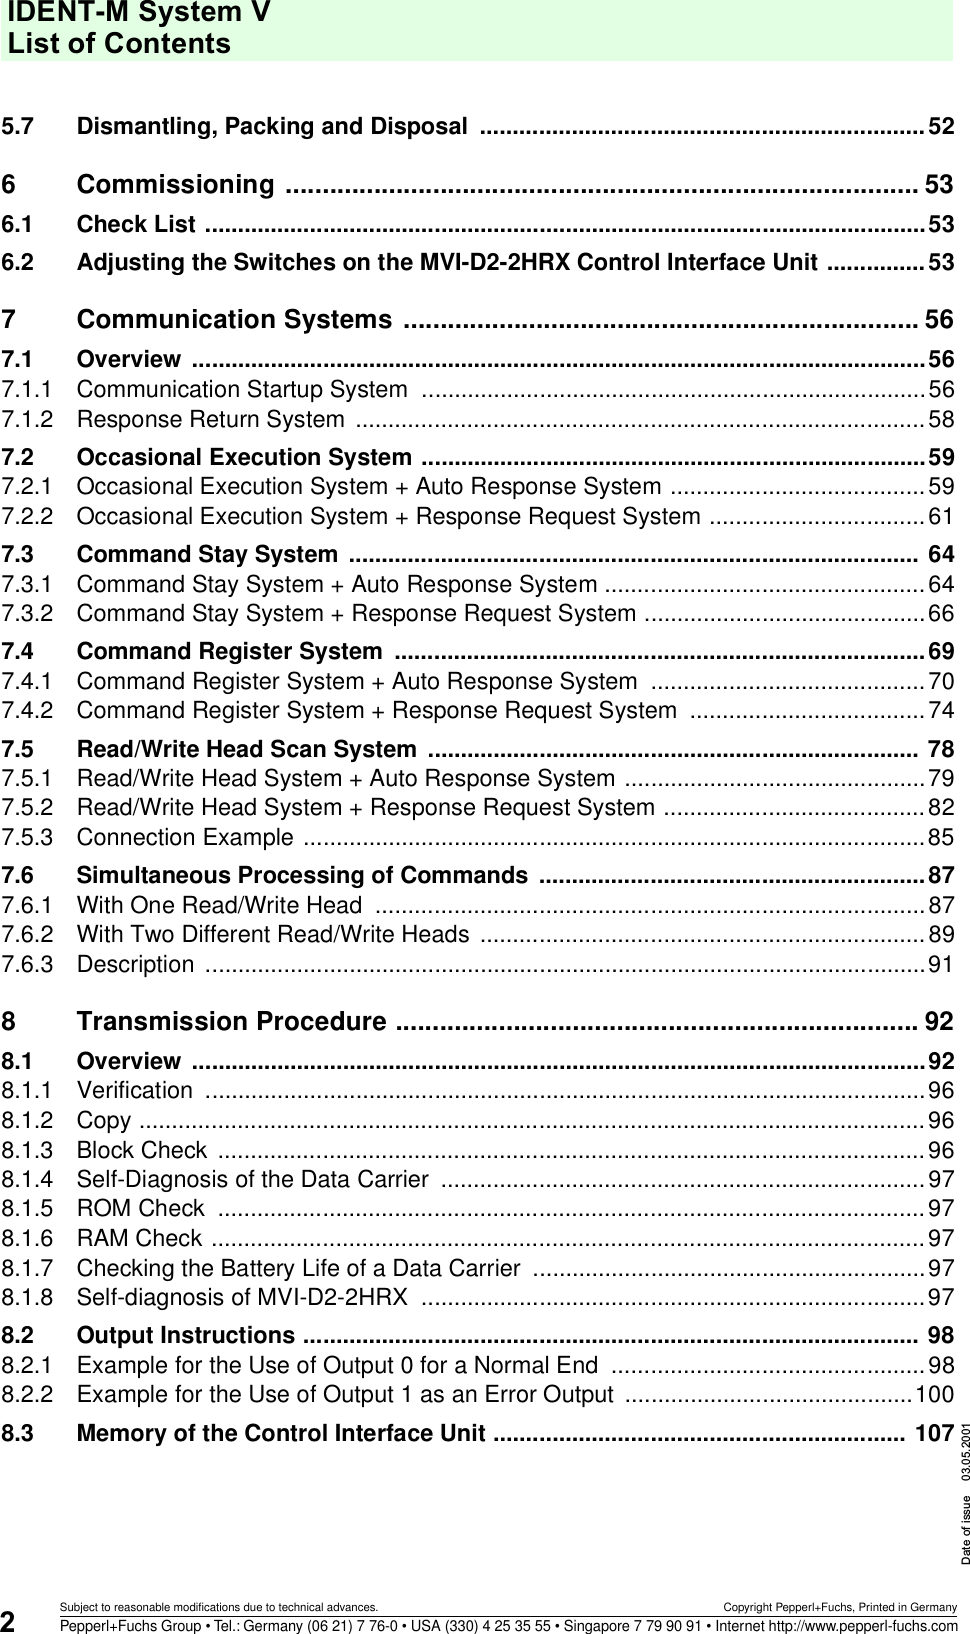 IDENT-M System V List of ContentsDate of issue 03.05.20012Subject to reasonable modifications due to technical advances. Copyright Pepperl+Fuchs, Printed in GermanyPepperl+Fuchs Group • Tel.: Germany (06 21) 7 76-0 • USA (330) 4 25 35 55 • Singapore 7 79 90 91 • Internet http://www.pepperl-fuchs.com5.7 Dismantling, Packing and Disposal  ....................................................................526 Commissioning ...................................................................................... 536.1 Check List ..............................................................................................................536.2 Adjusting the Switches on the MVI-D2-2HRX Control Interface Unit ...............537 Communication Systems ...................................................................... 567.1 Overview ................................................................................................................567.1.1 Communication Startup System  .............................................................................567.1.2 Response Return System .......................................................................................587.2 Occasional Execution System .............................................................................597.2.1 Occasional Execution System + Auto Response System .......................................597.2.2 Occasional Execution System + Response Request System .................................617.3 Command Stay System ....................................................................................... 647.3.1 Command Stay System + Auto Response System .................................................647.3.2 Command Stay System + Response Request System ...........................................667.4 Command Register System  .................................................................................697.4.1 Command Register System + Auto Response System  ..........................................707.4.2 Command Register System + Response Request System  ....................................747.5 Read/Write Head Scan System ........................................................................... 787.5.1 Read/Write Head System + Auto Response System ..............................................797.5.2 Read/Write Head System + Response Request System ........................................827.5.3 Connection Example ...............................................................................................857.6 Simultaneous Processing of Commands  ...........................................................877.6.1 With One Read/Write Head  ....................................................................................877.6.2 With Two Different Read/Write Heads ....................................................................897.6.3 Description ..............................................................................................................918 Transmission Procedure ....................................................................... 928.1 Overview ................................................................................................................928.1.1 Verification ..............................................................................................................968.1.2 Copy ........................................................................................................................968.1.3 Block Check  ............................................................................................................968.1.4 Self-Diagnosis of the Data Carrier  ..........................................................................978.1.5 ROM Check  ............................................................................................................978.1.6 RAM Check .............................................................................................................978.1.7 Checking the Battery Life of a Data Carrier  ............................................................978.1.8 Self-diagnosis of MVI-D2-2HRX  .............................................................................978.2 Output Instructions .............................................................................................. 988.2.1 Example for the Use of Output 0 for a Normal End  ................................................988.2.2 Example for the Use of Output 1 as an Error Output  ............................................1008.3 Memory of the Control Interface Unit ............................................................... 107